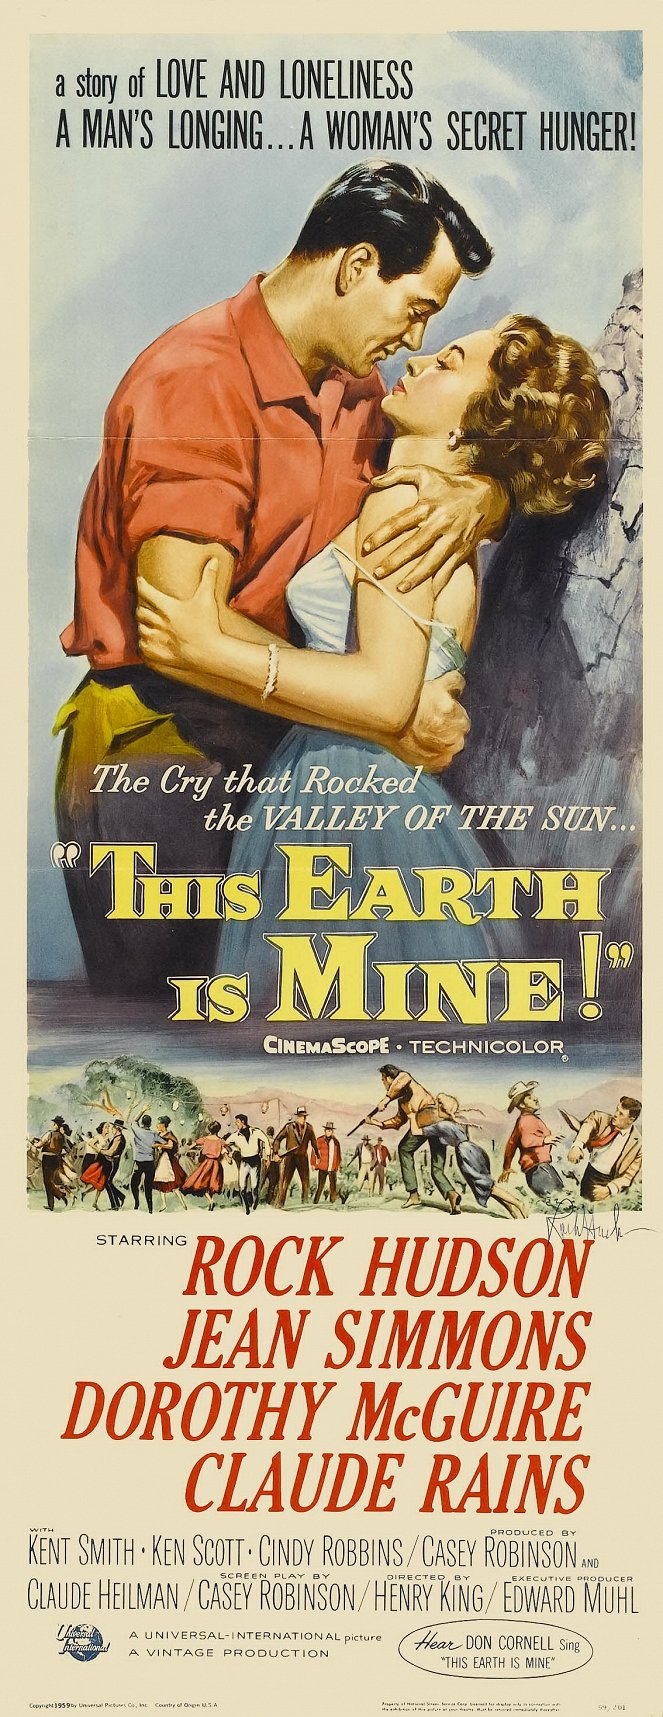 This Earth Is Mine - Posters